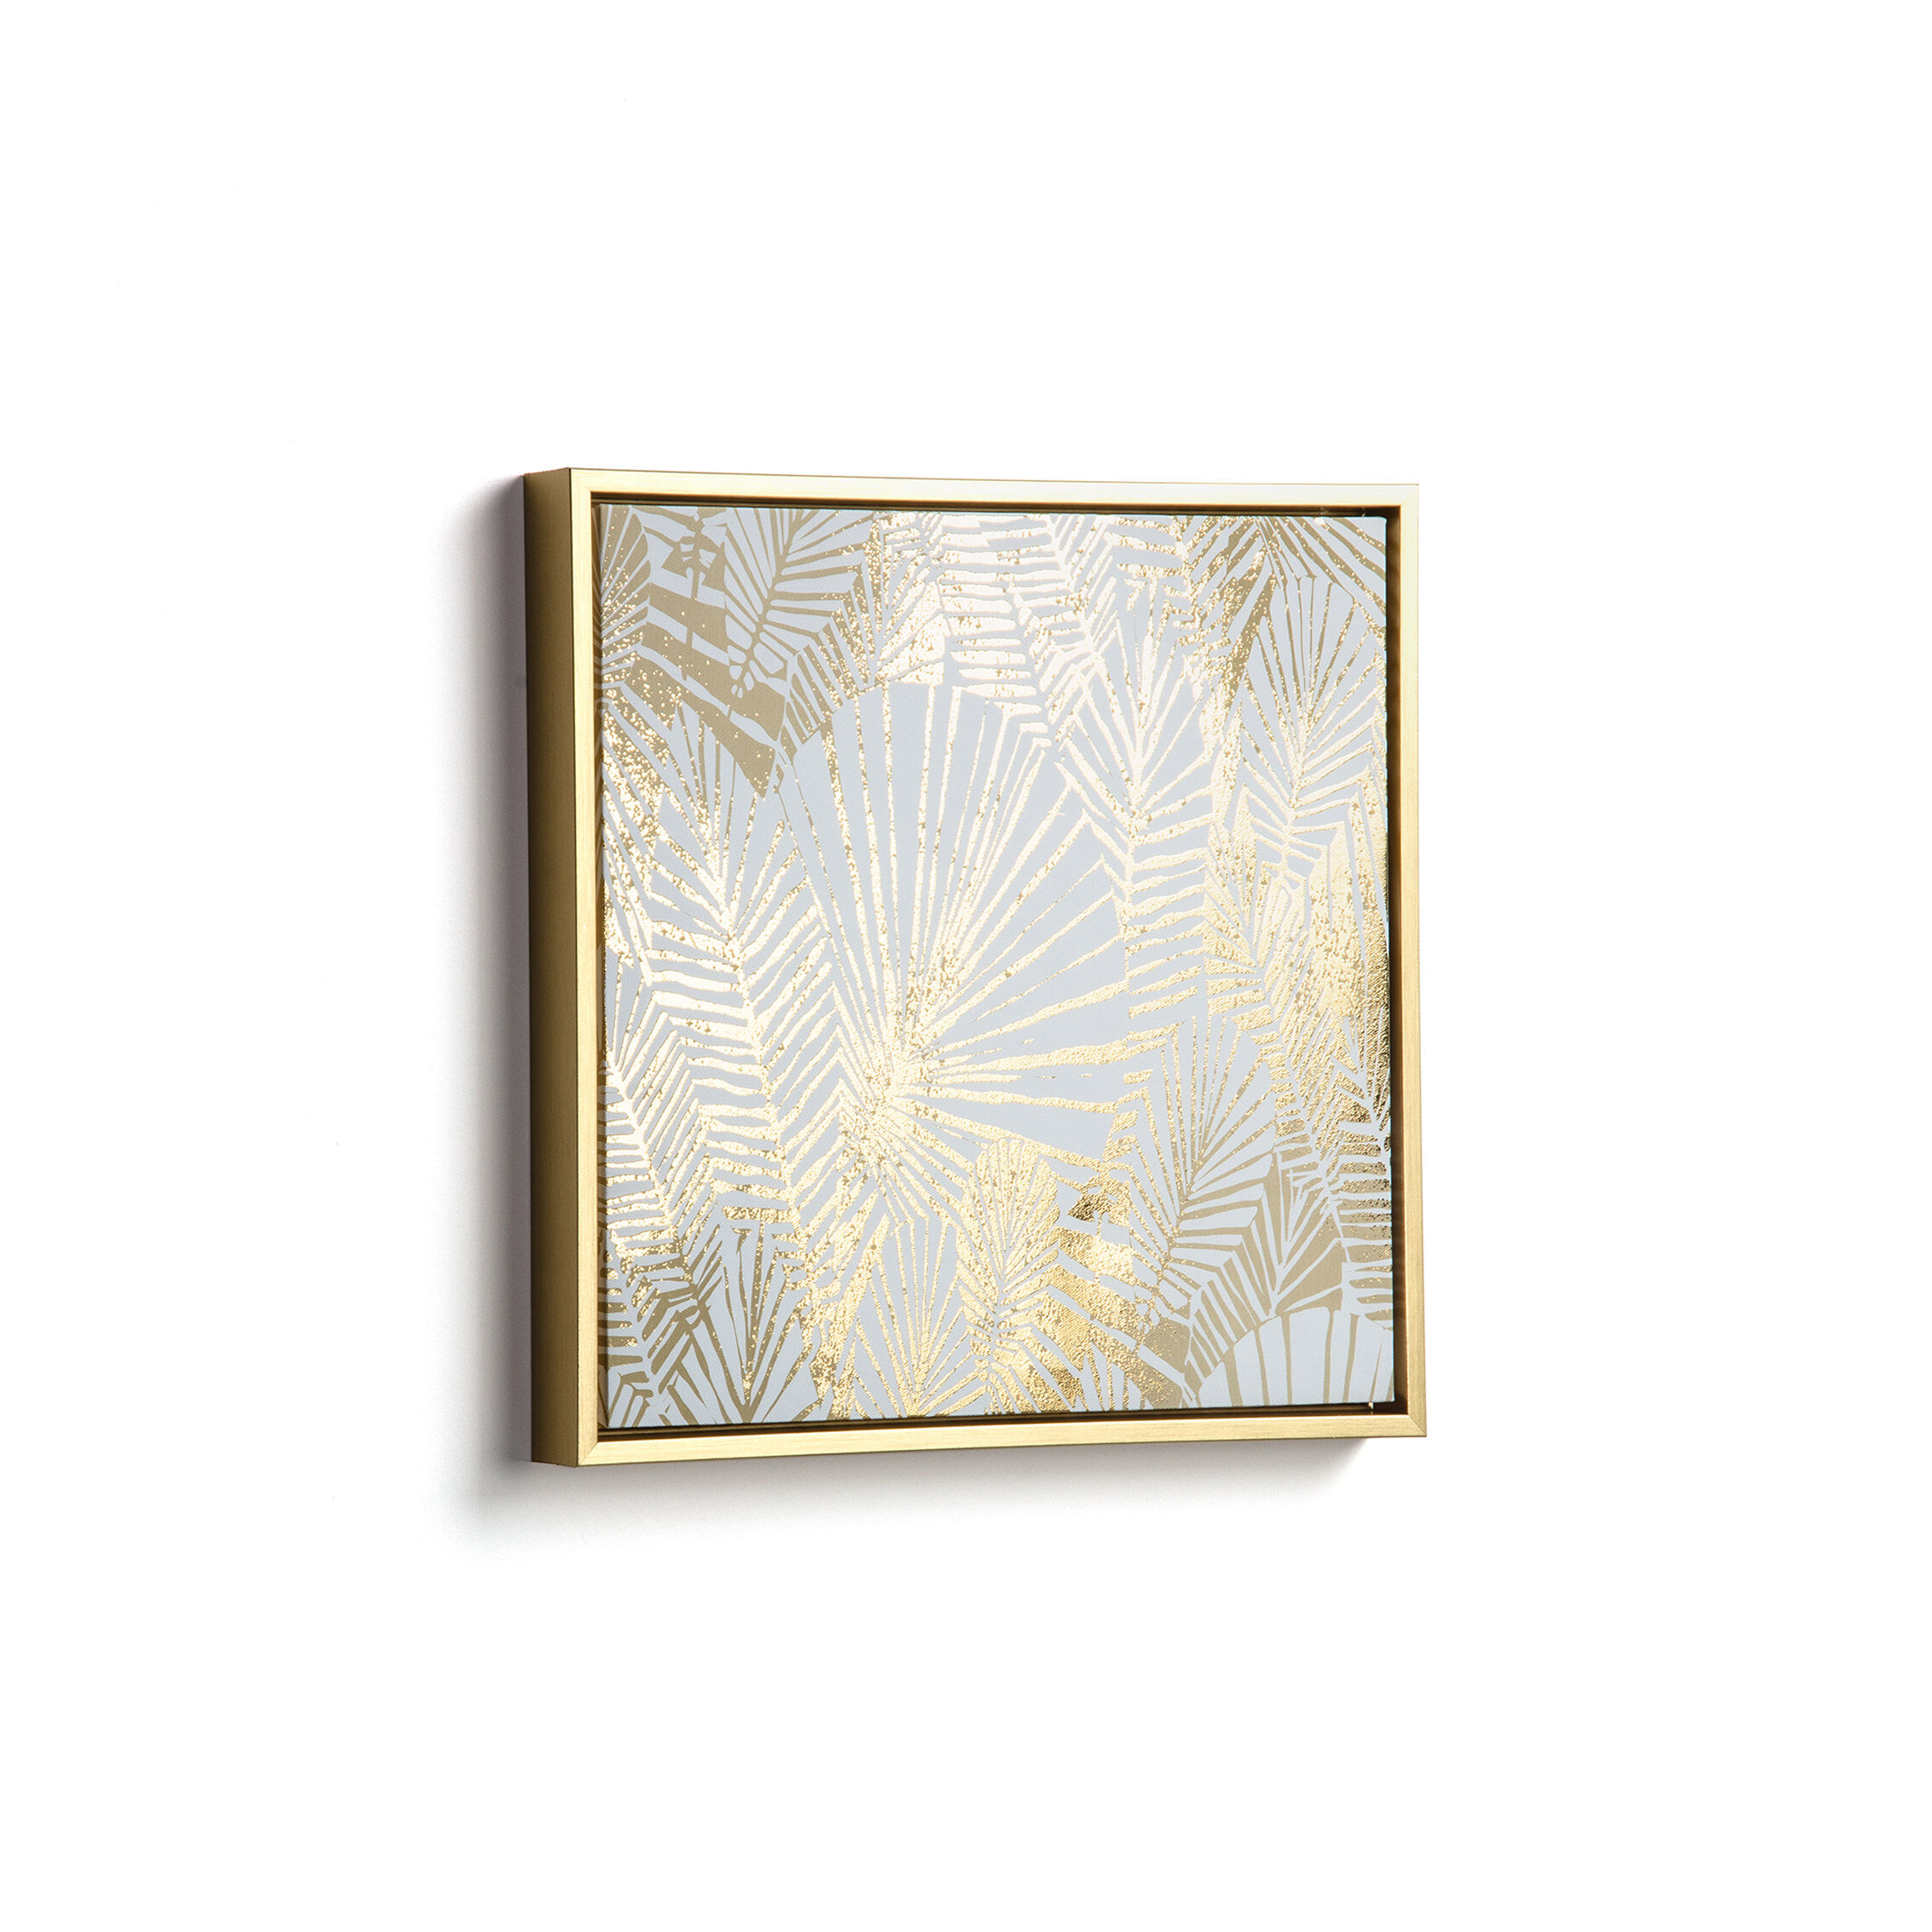 Kave Home Imogen gold picture 40 x 40 cm